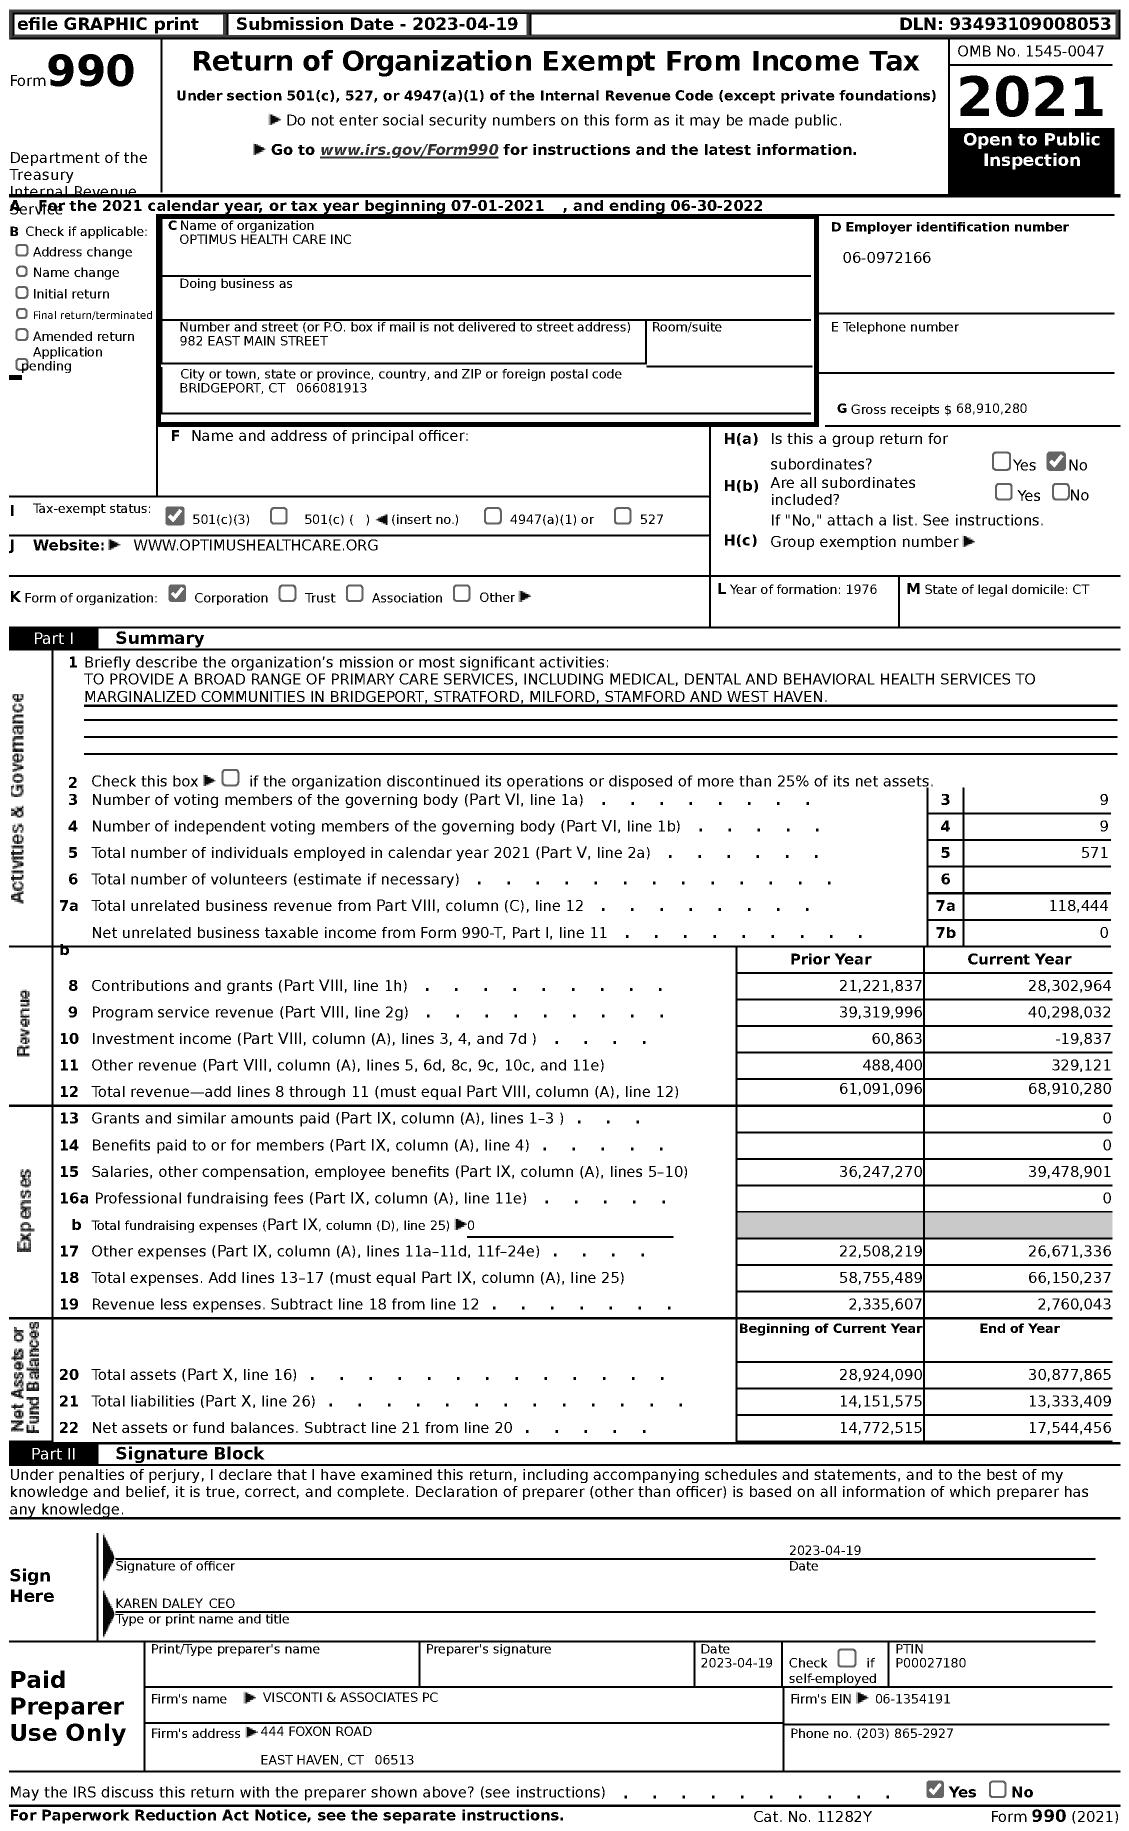 Image of first page of 2021 Form 990 for Optimus Health Care (OHC)